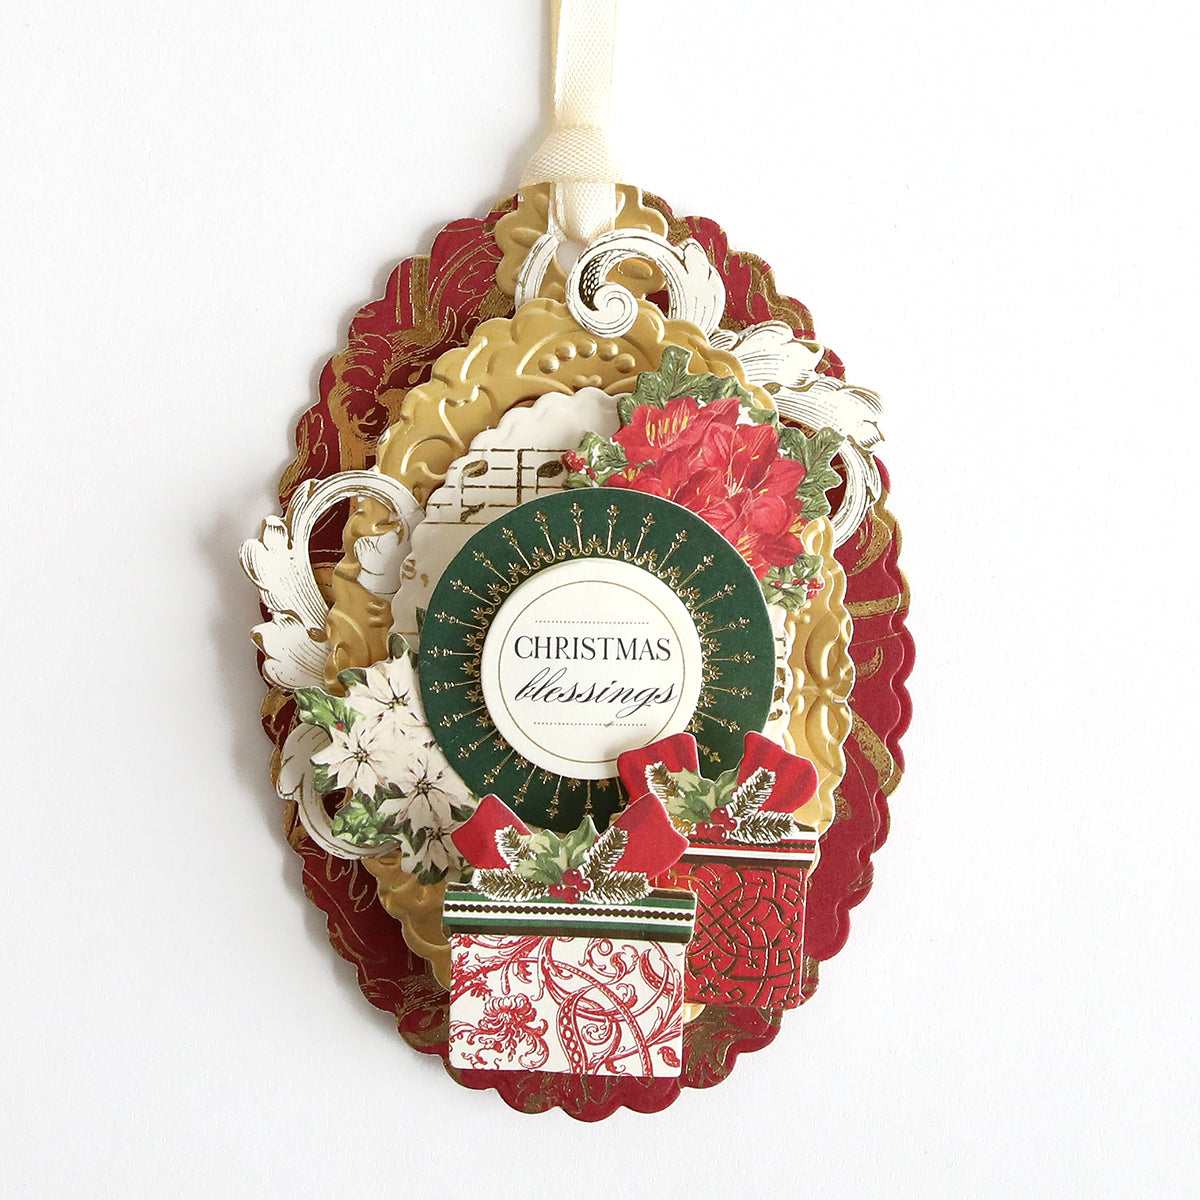 A personalized Christmas ornament hanging on a chain with a Gift Tag Compendium Dies.